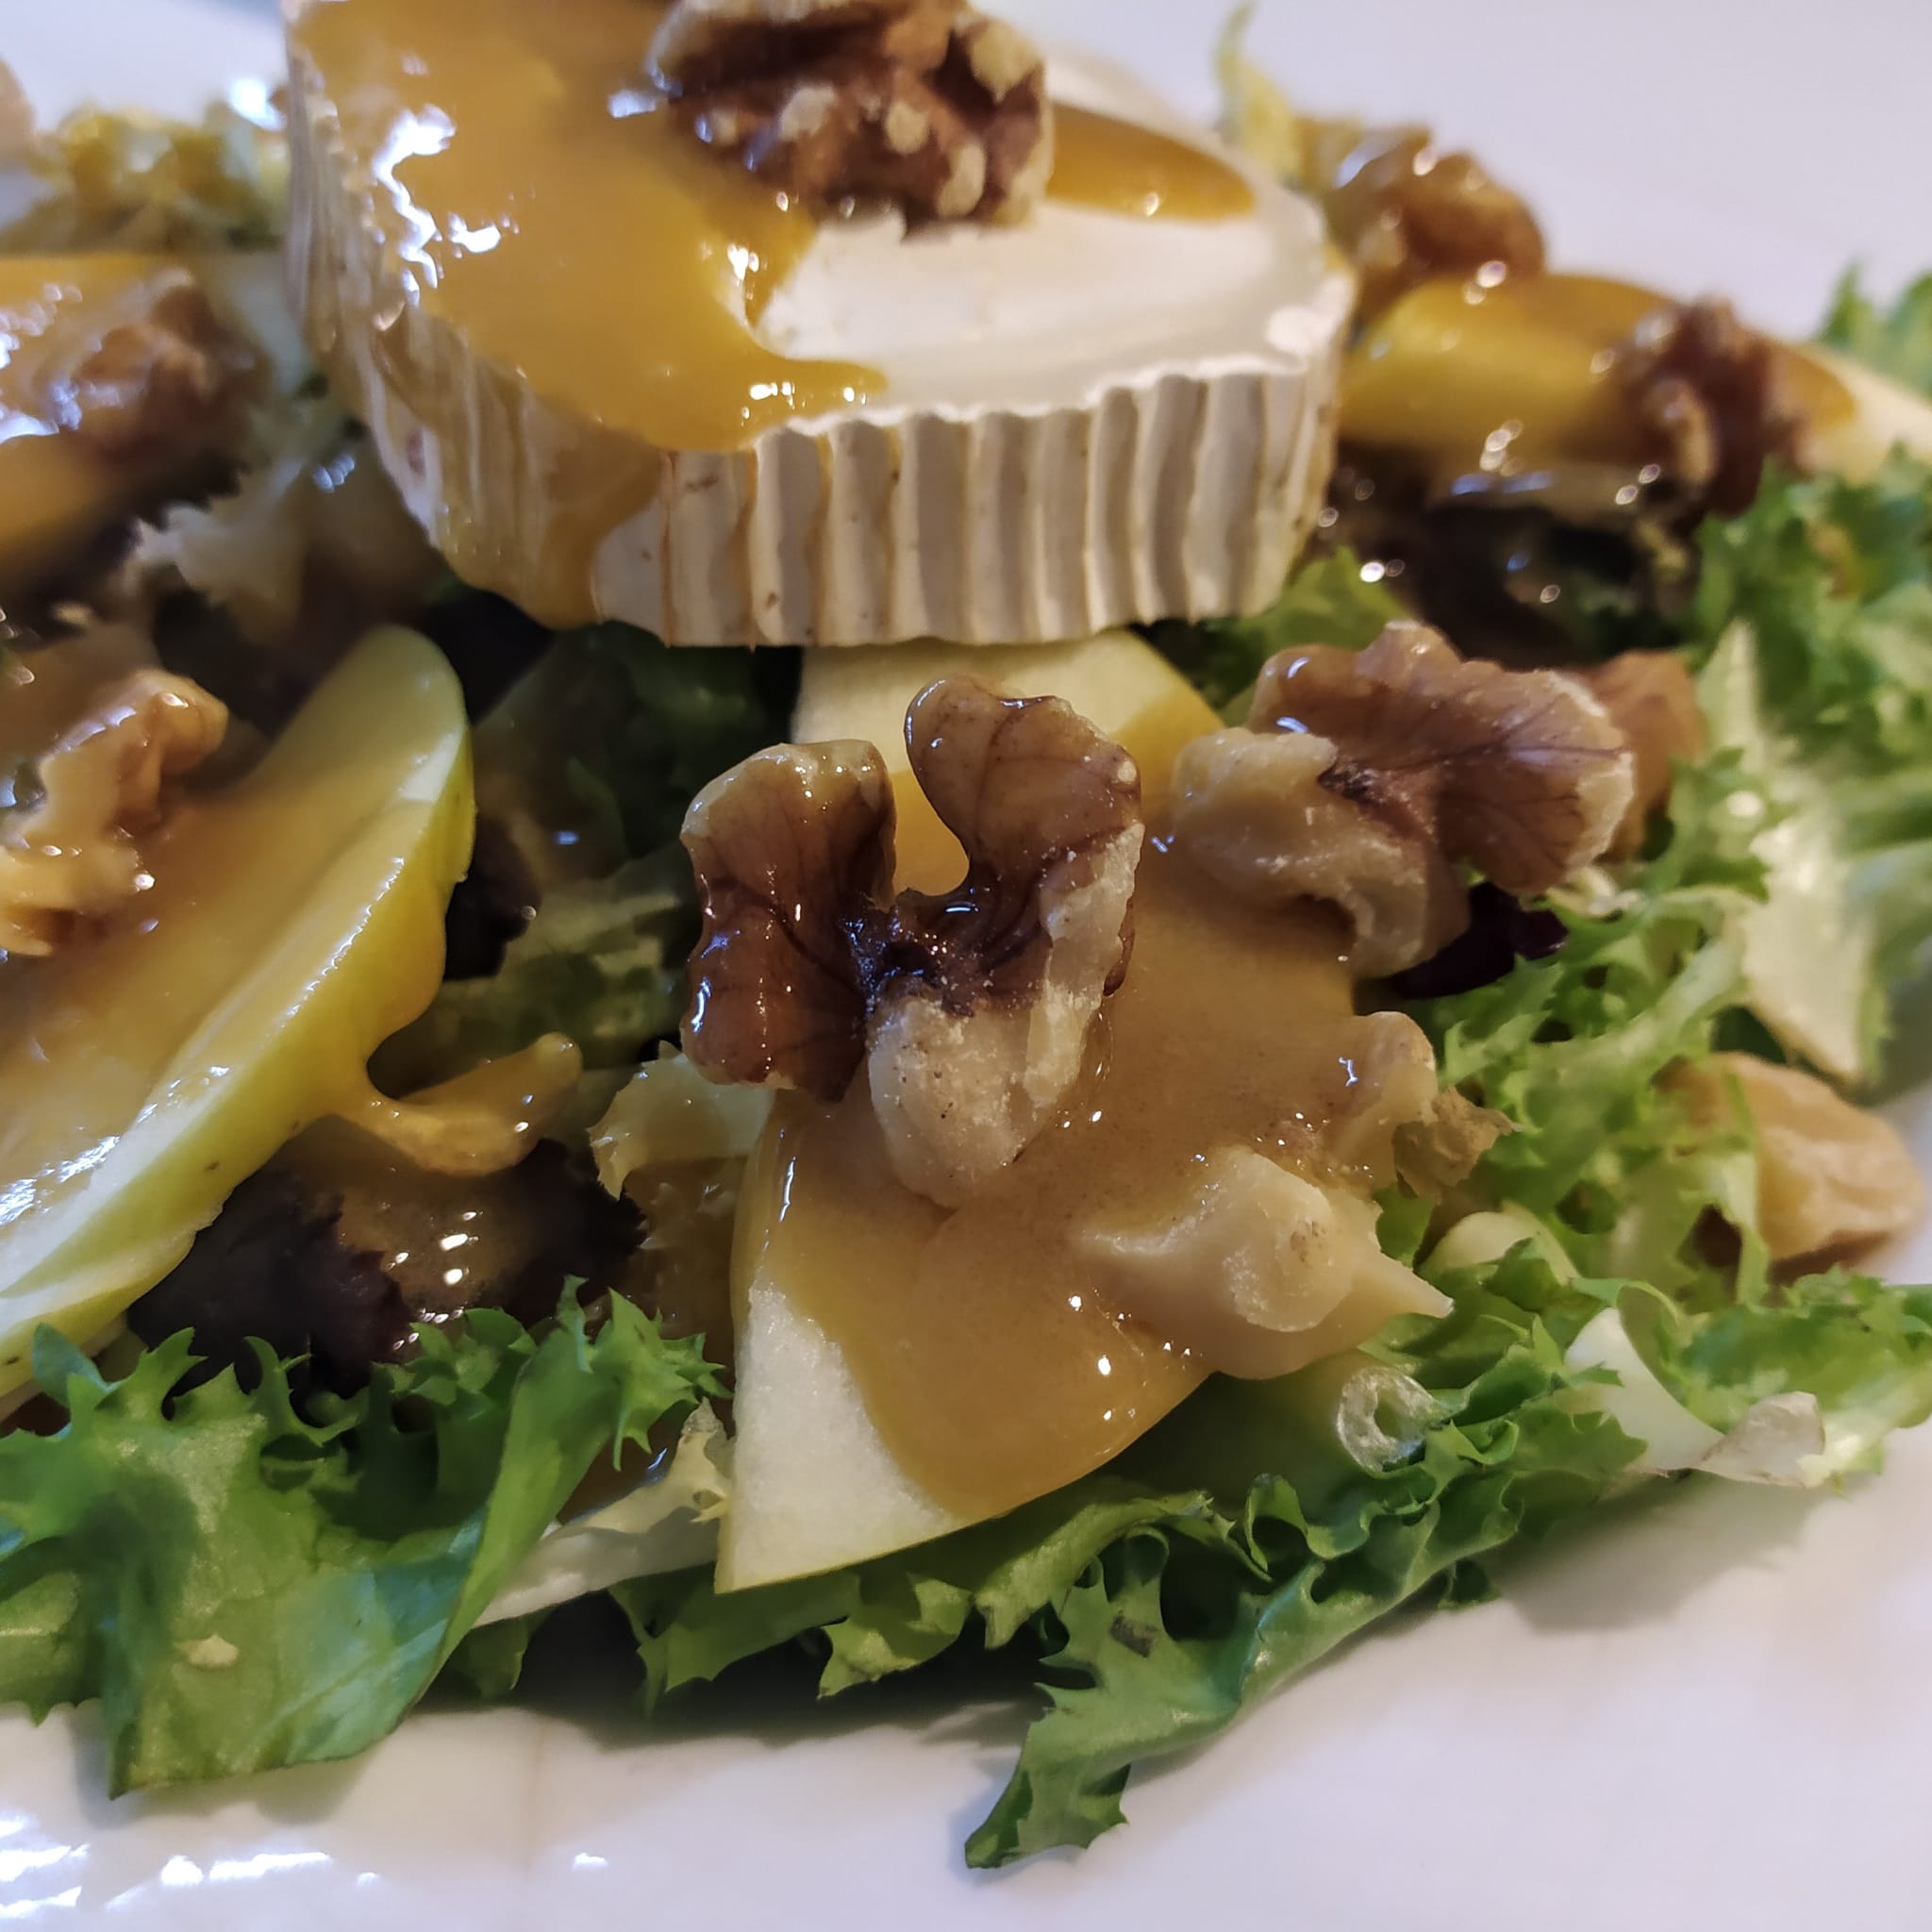 Goat cheesse salad: Lettuce, goat cheese, apple and nuts